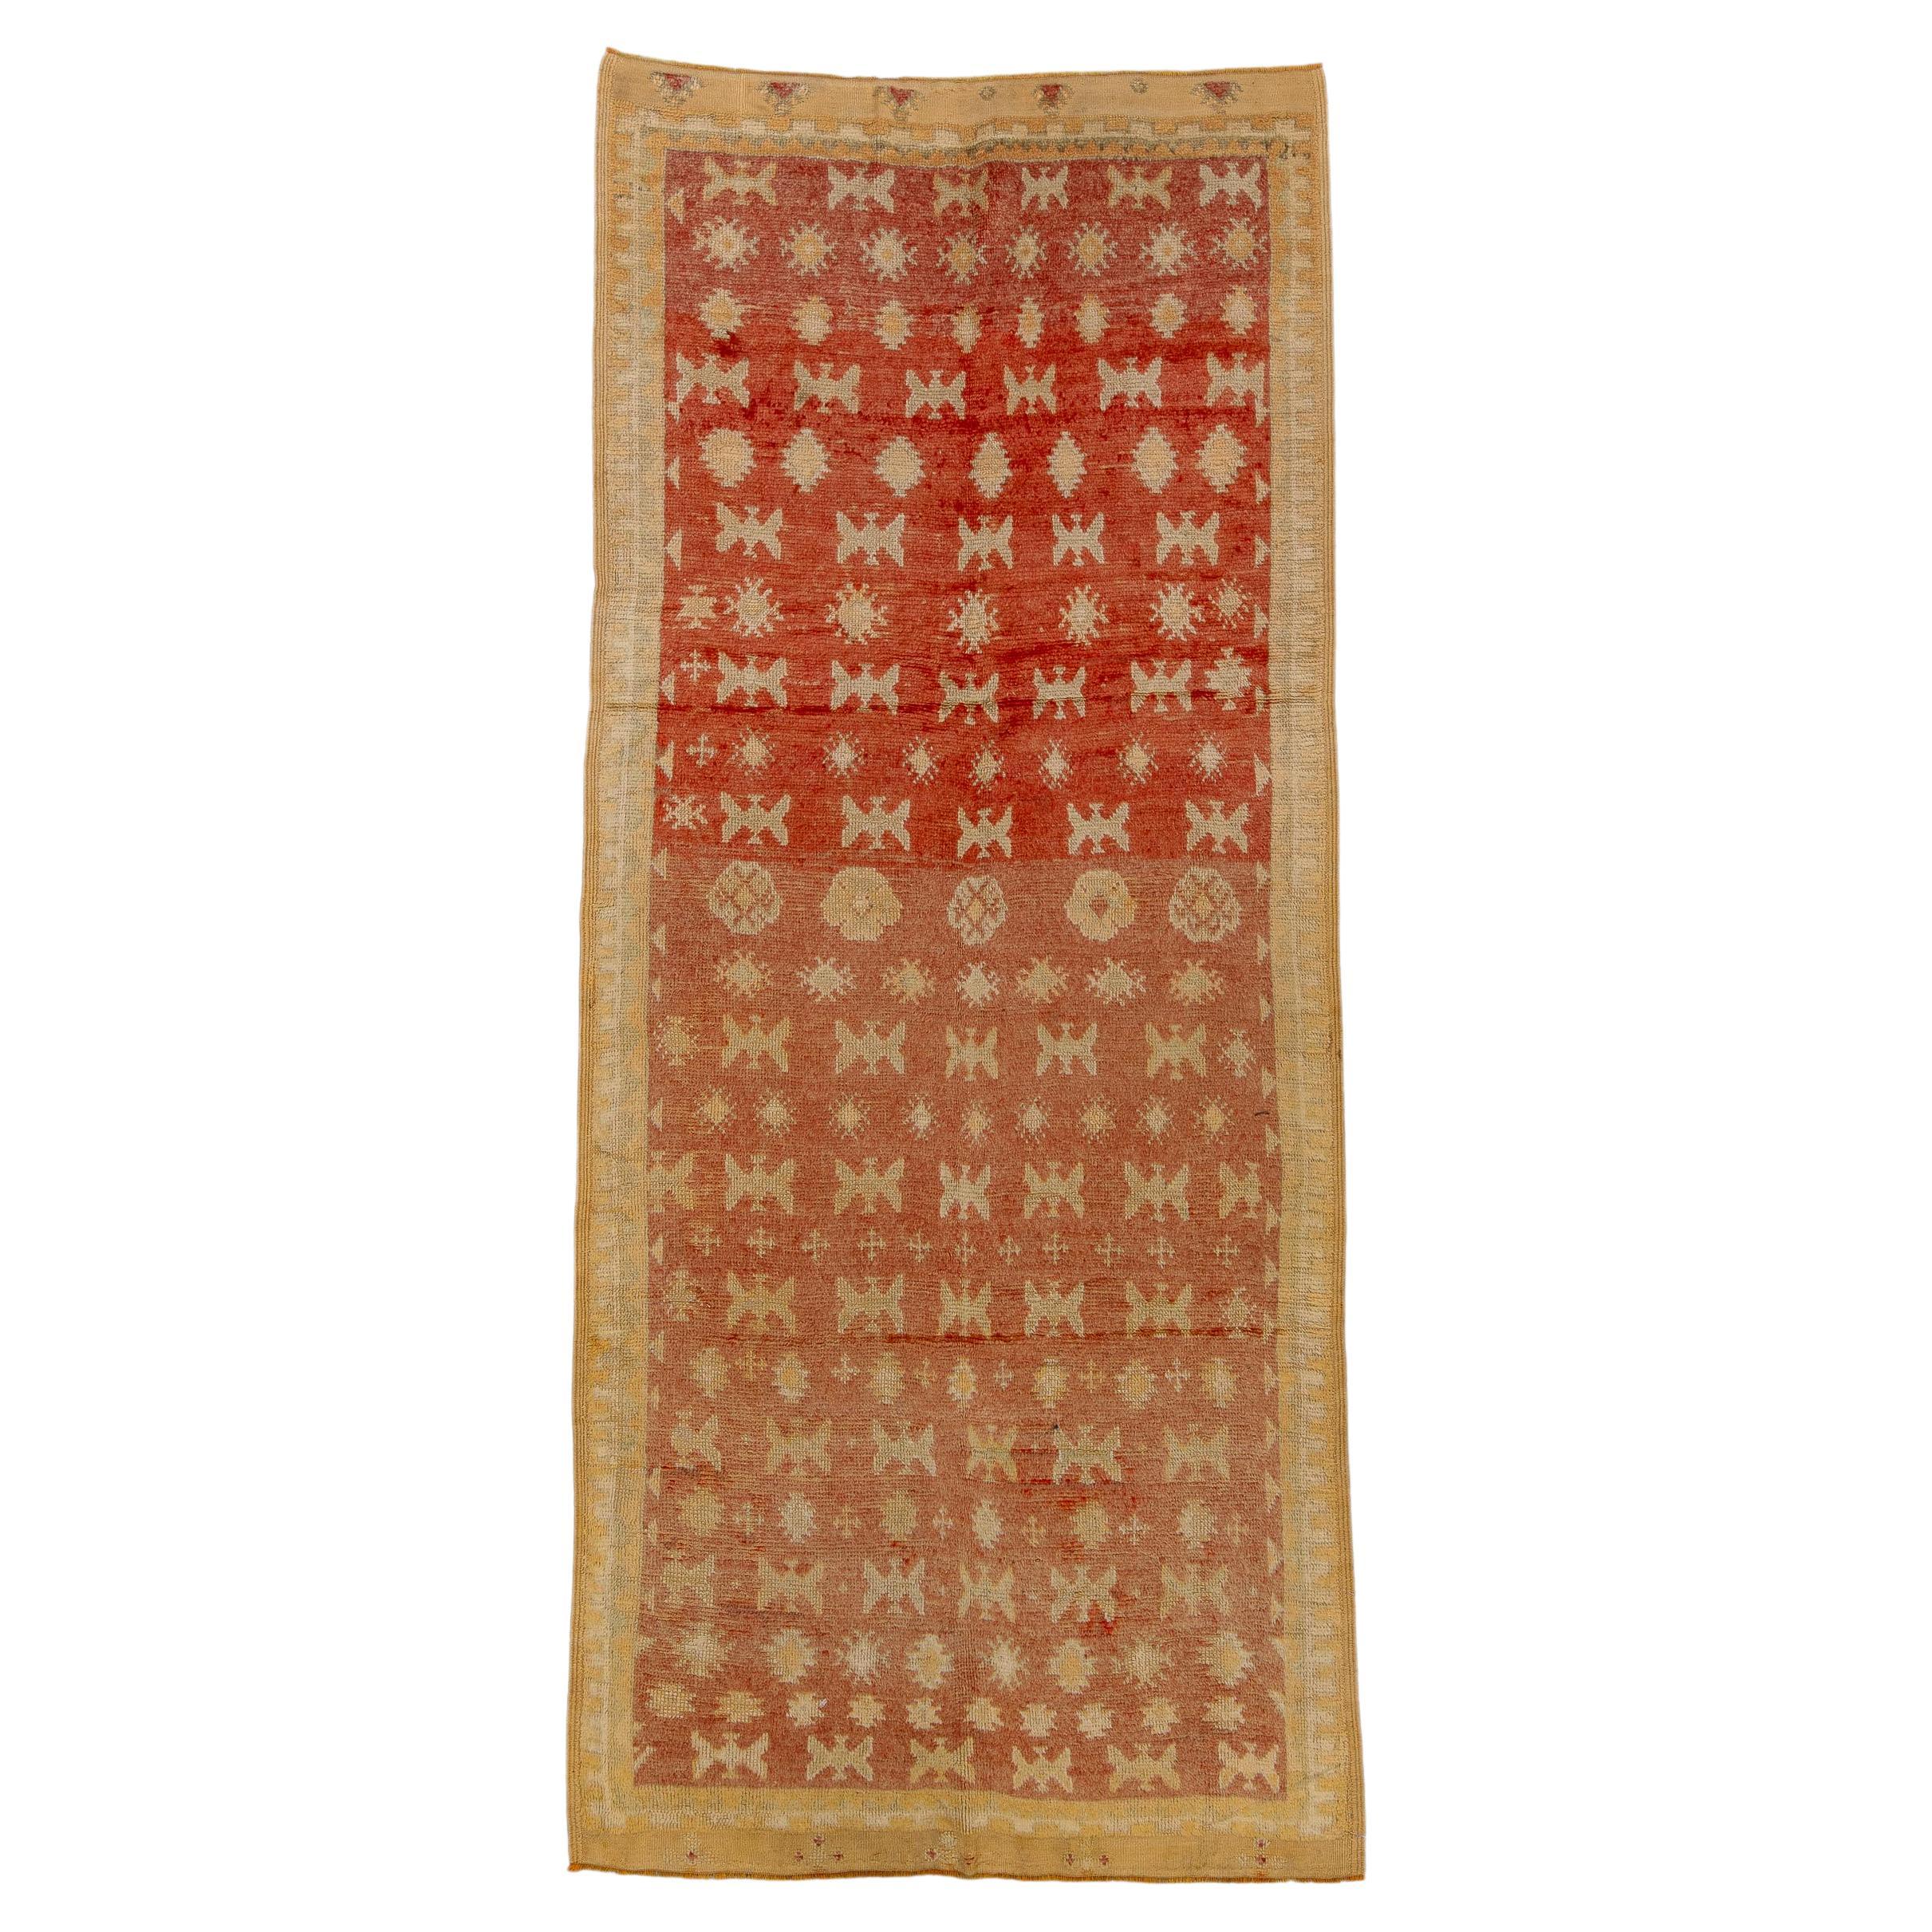 Tribal Allover Moroccan Rug in Gold and Red Tones